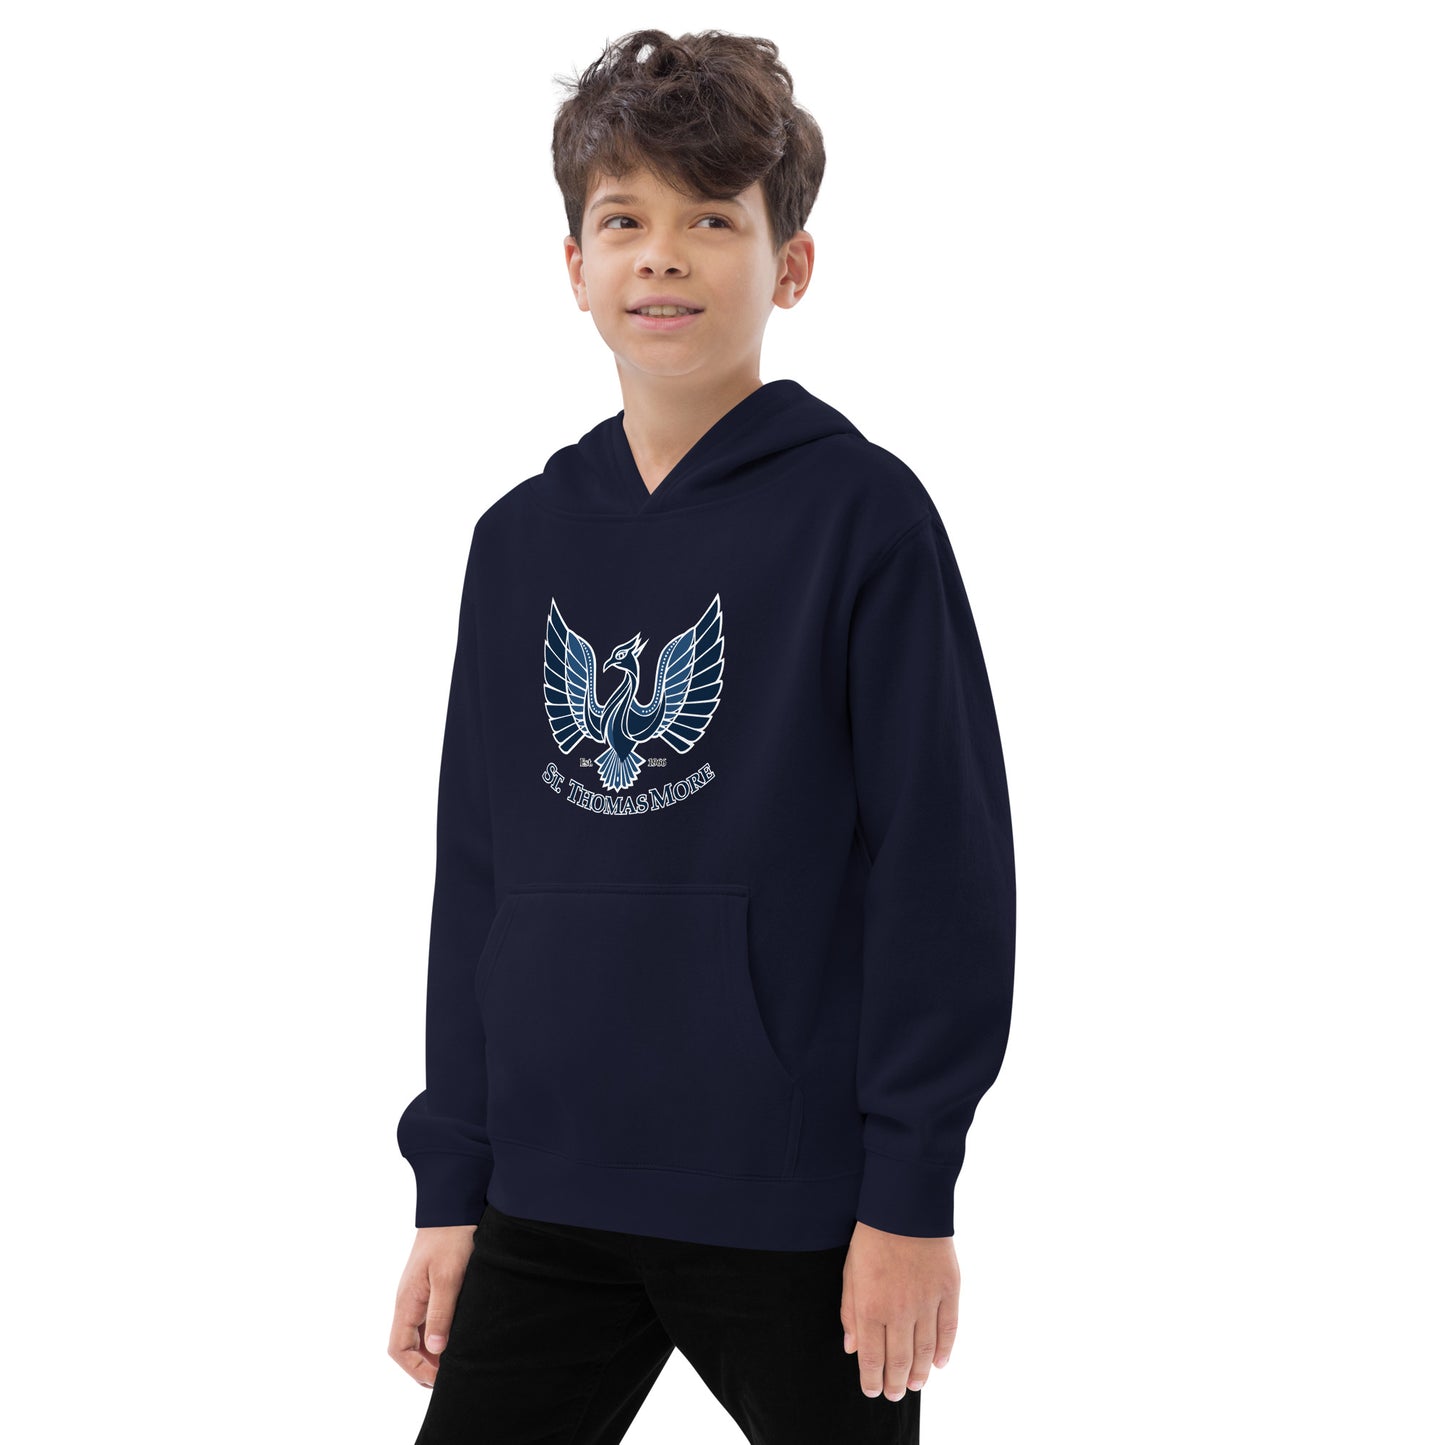 St. Thomas More Uniform Code Approved Youth Fleece Hoodie